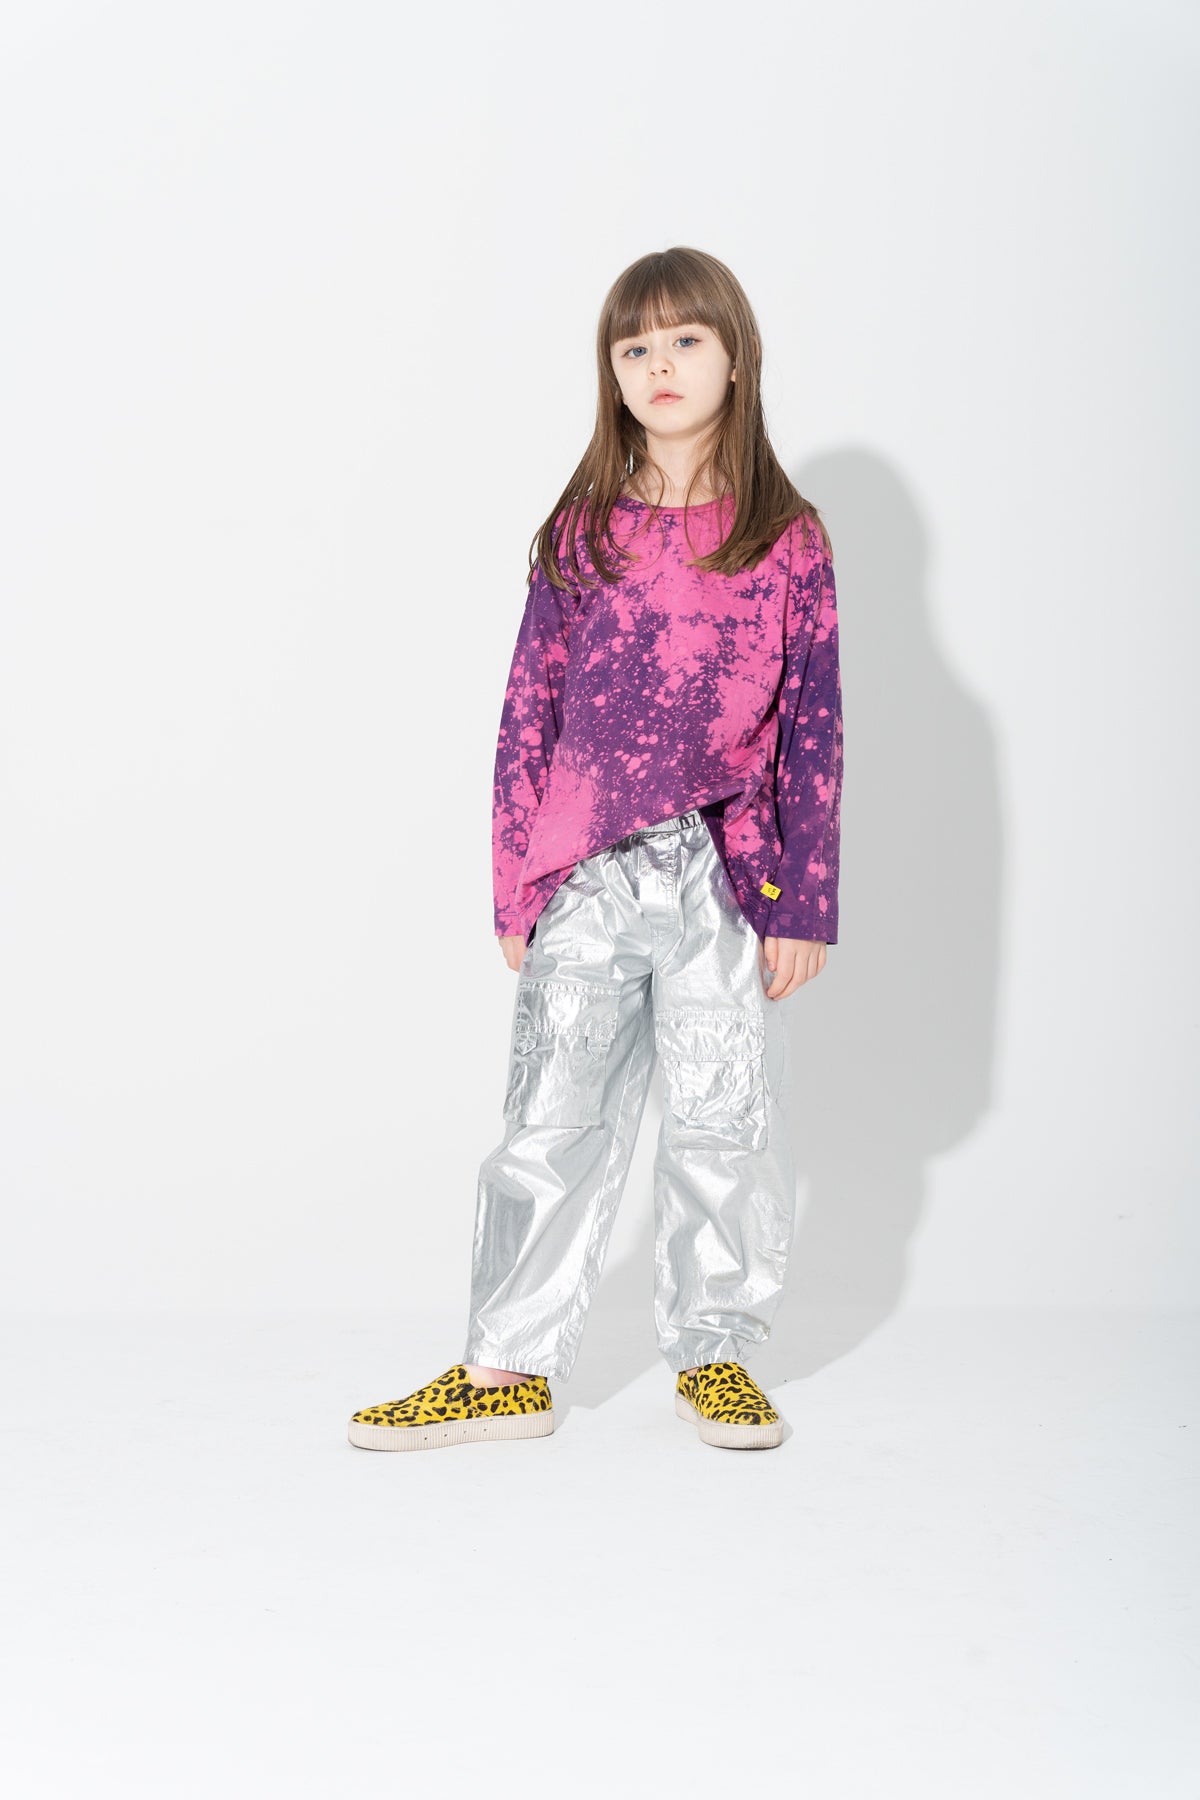 PURPLE AND PINK SPLATERED LONG SLEEVE TOP makids